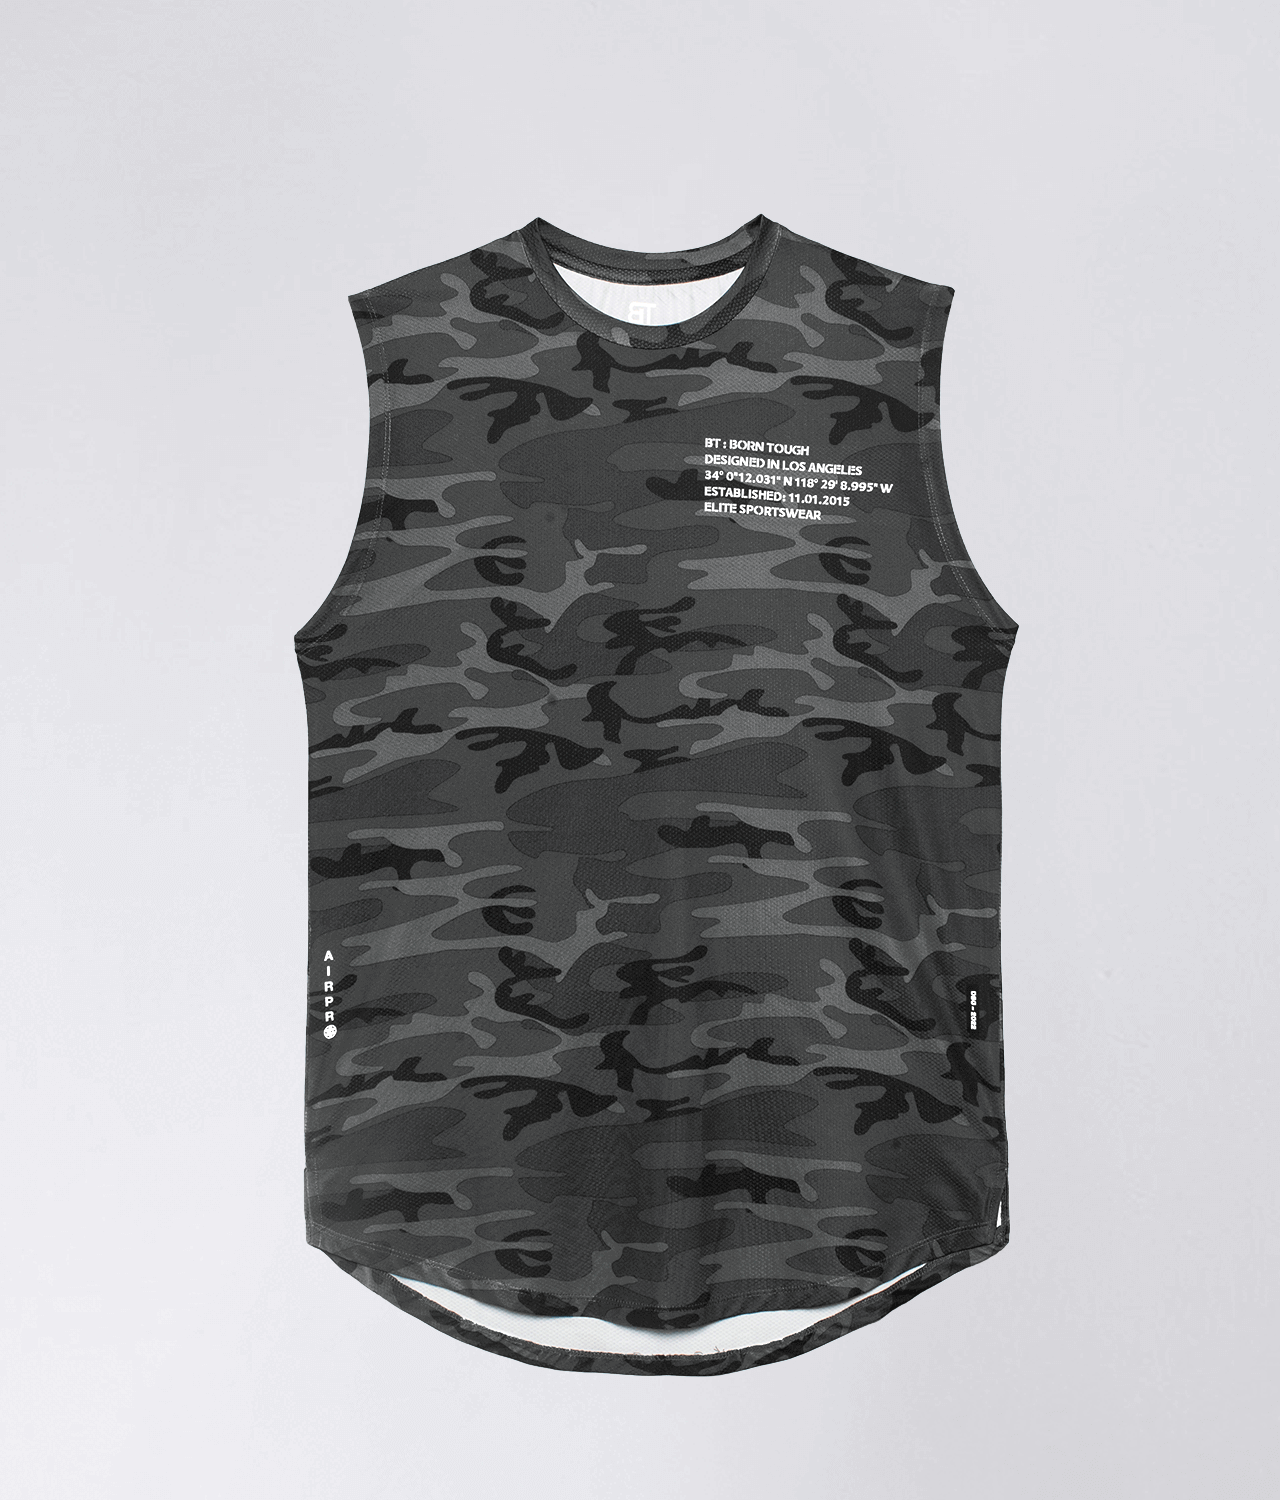 Born Tough Air Pro™ Mesh Fitted Sleeveless White Camo Gym Workout Tee Shirt  For Men